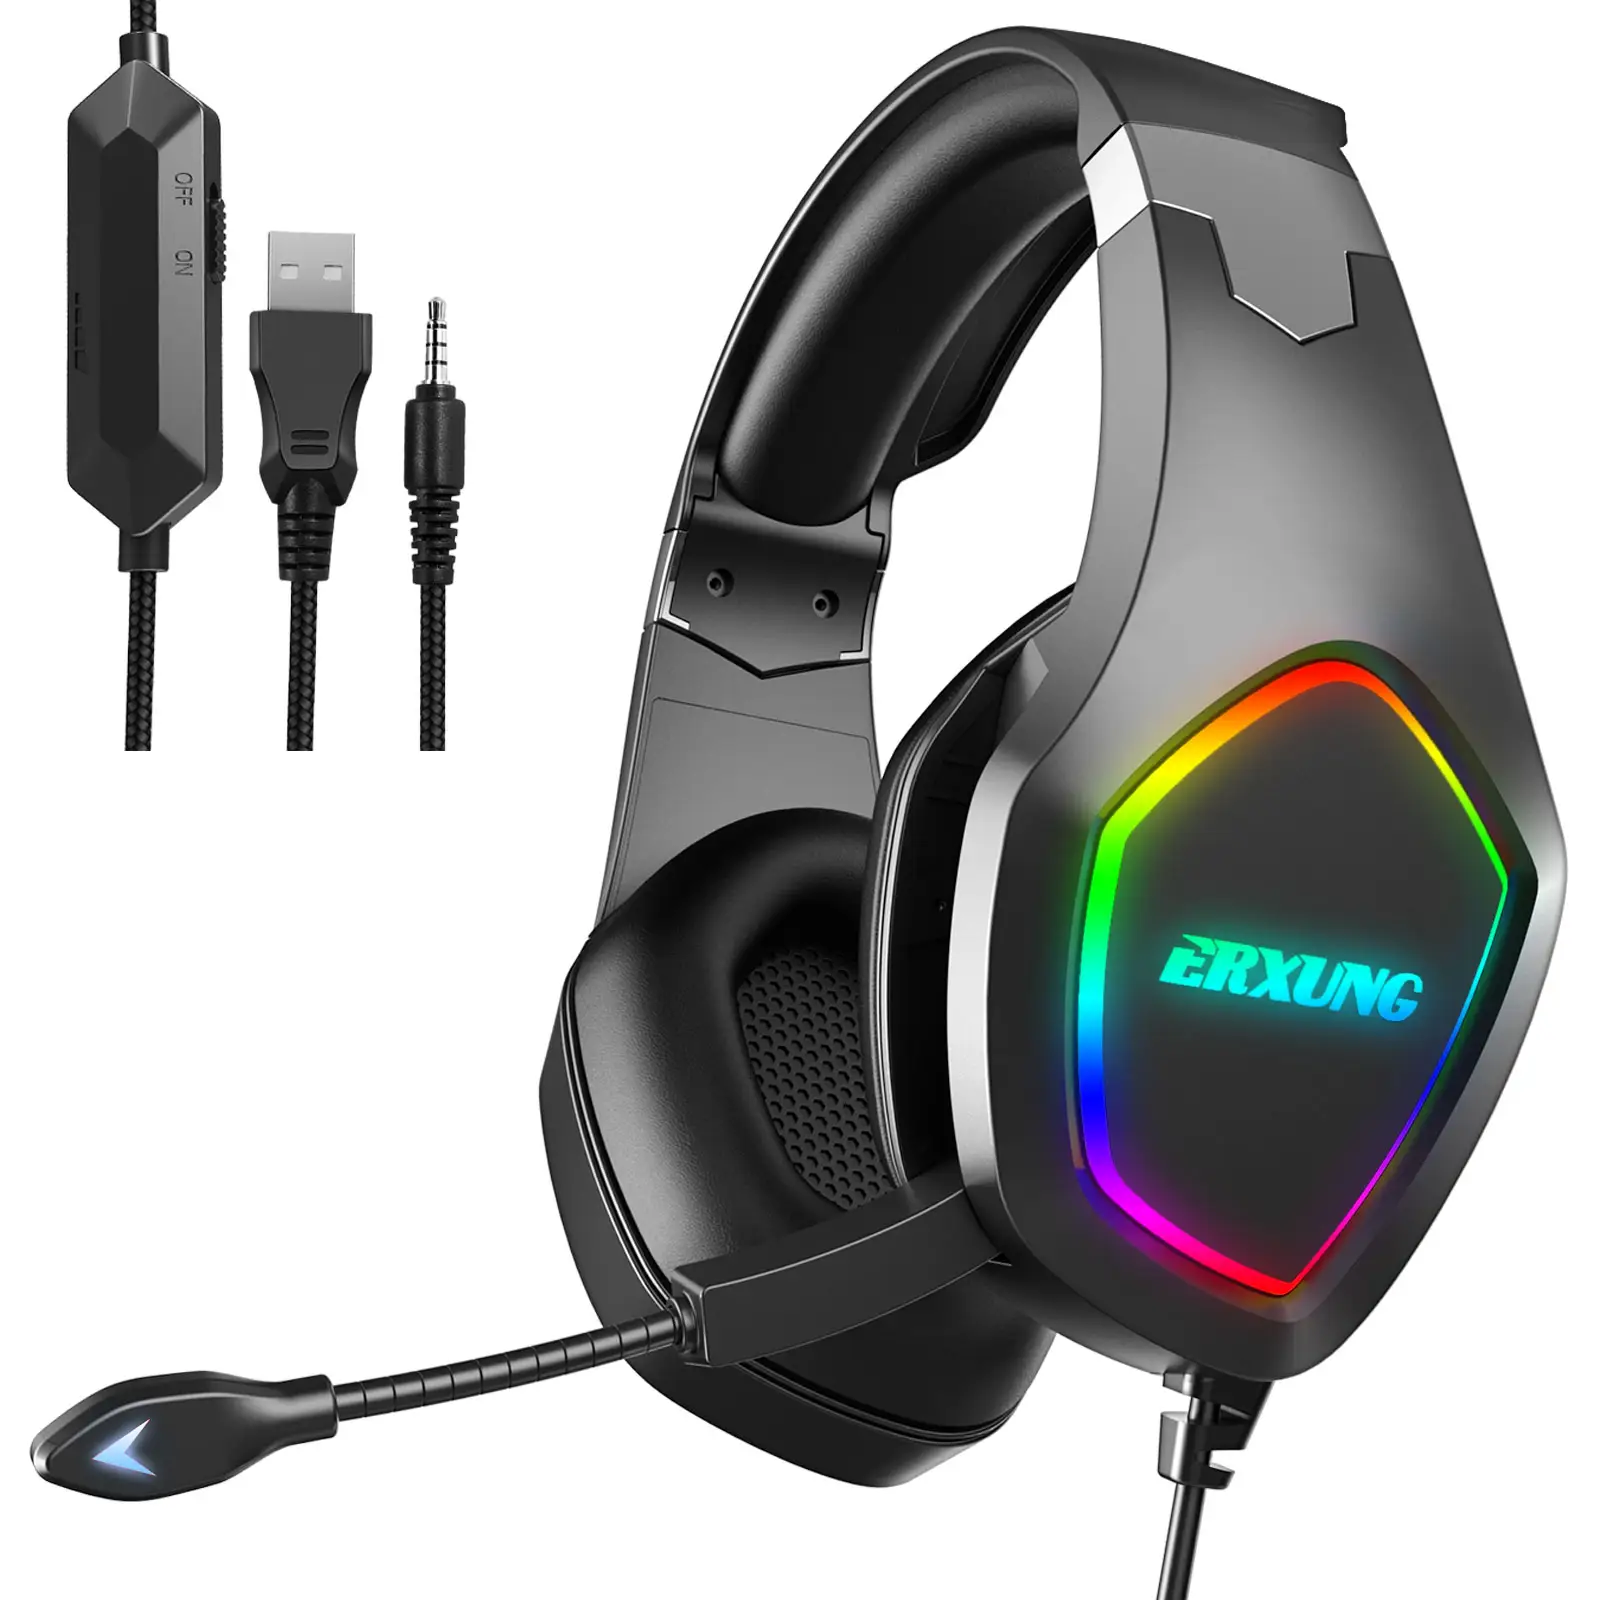 Best 7.1 Surround Sound Wired Gaming Headset For Xbox One S/PlavStaion 4/PS Vita/PC/Laptop/Android Device/iOS Device